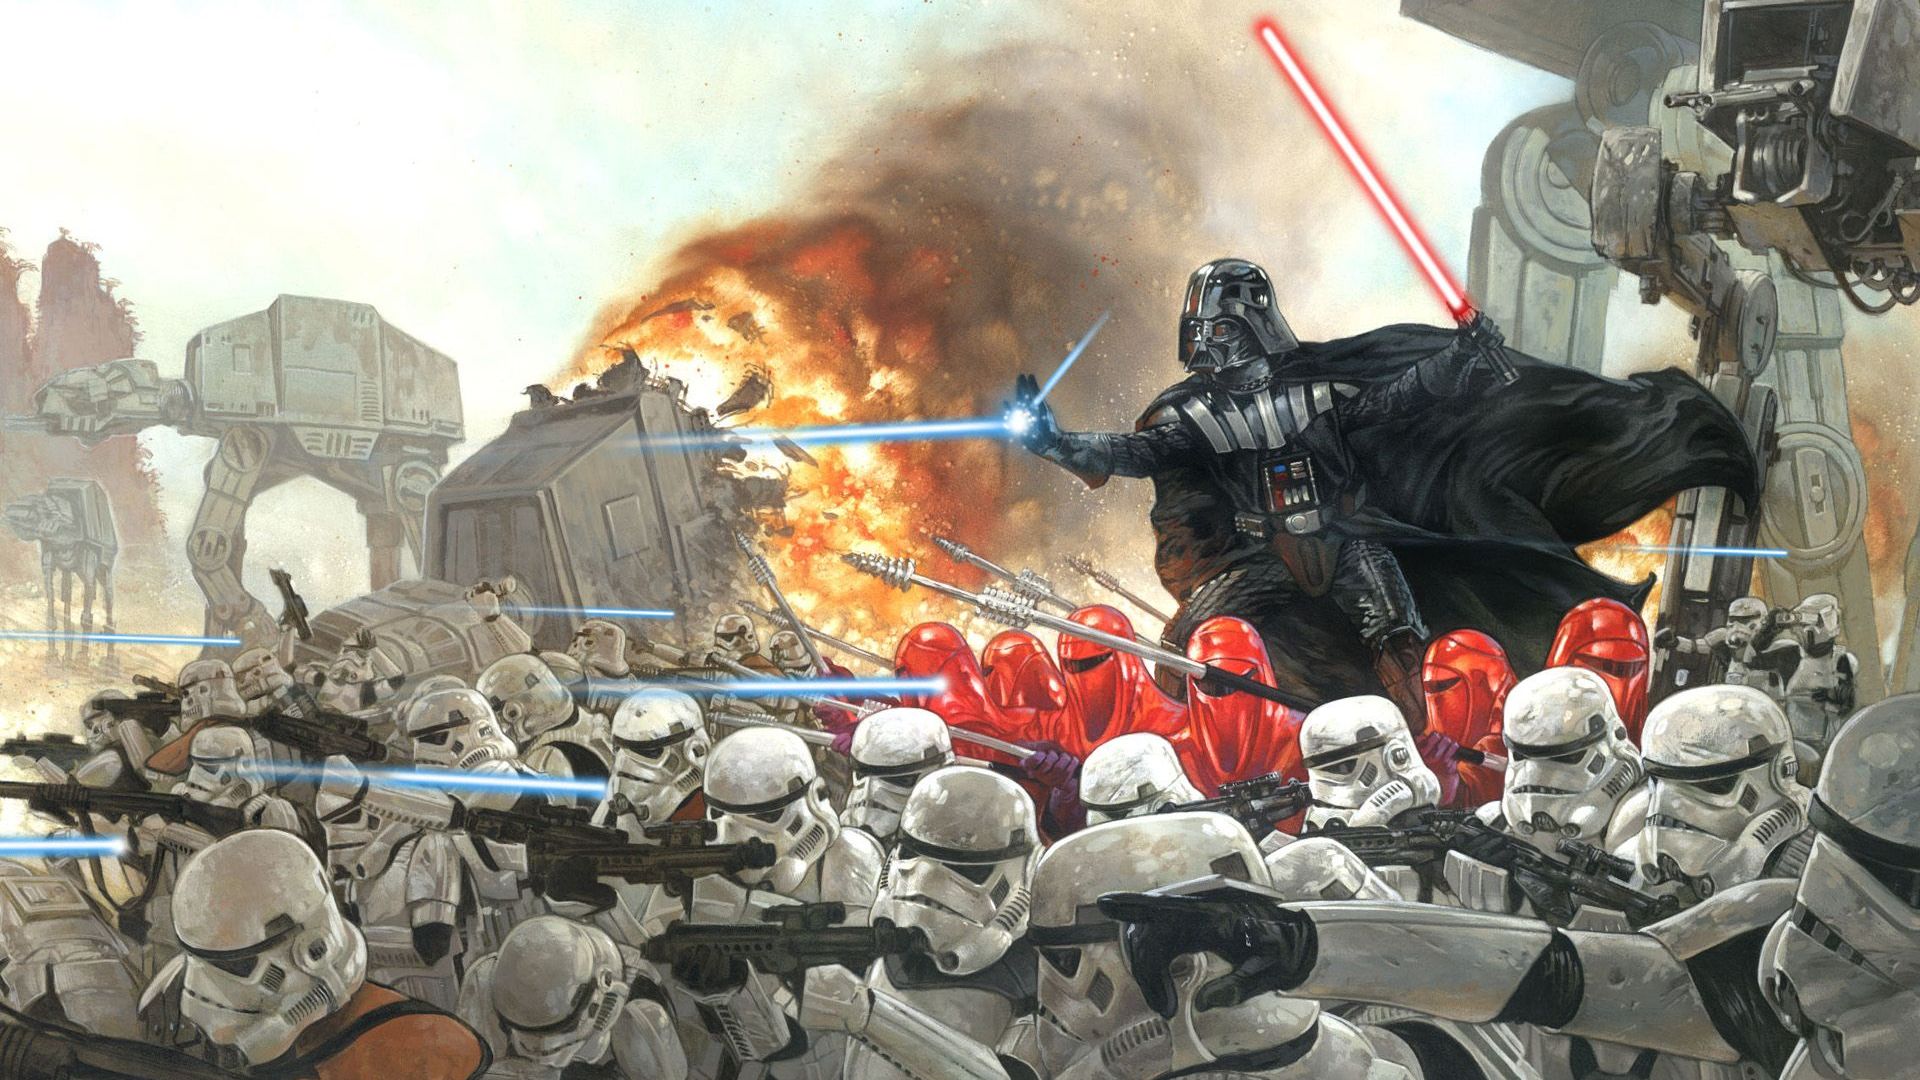 Vader And Stormtroopers In Battle Game HD Wallpaper